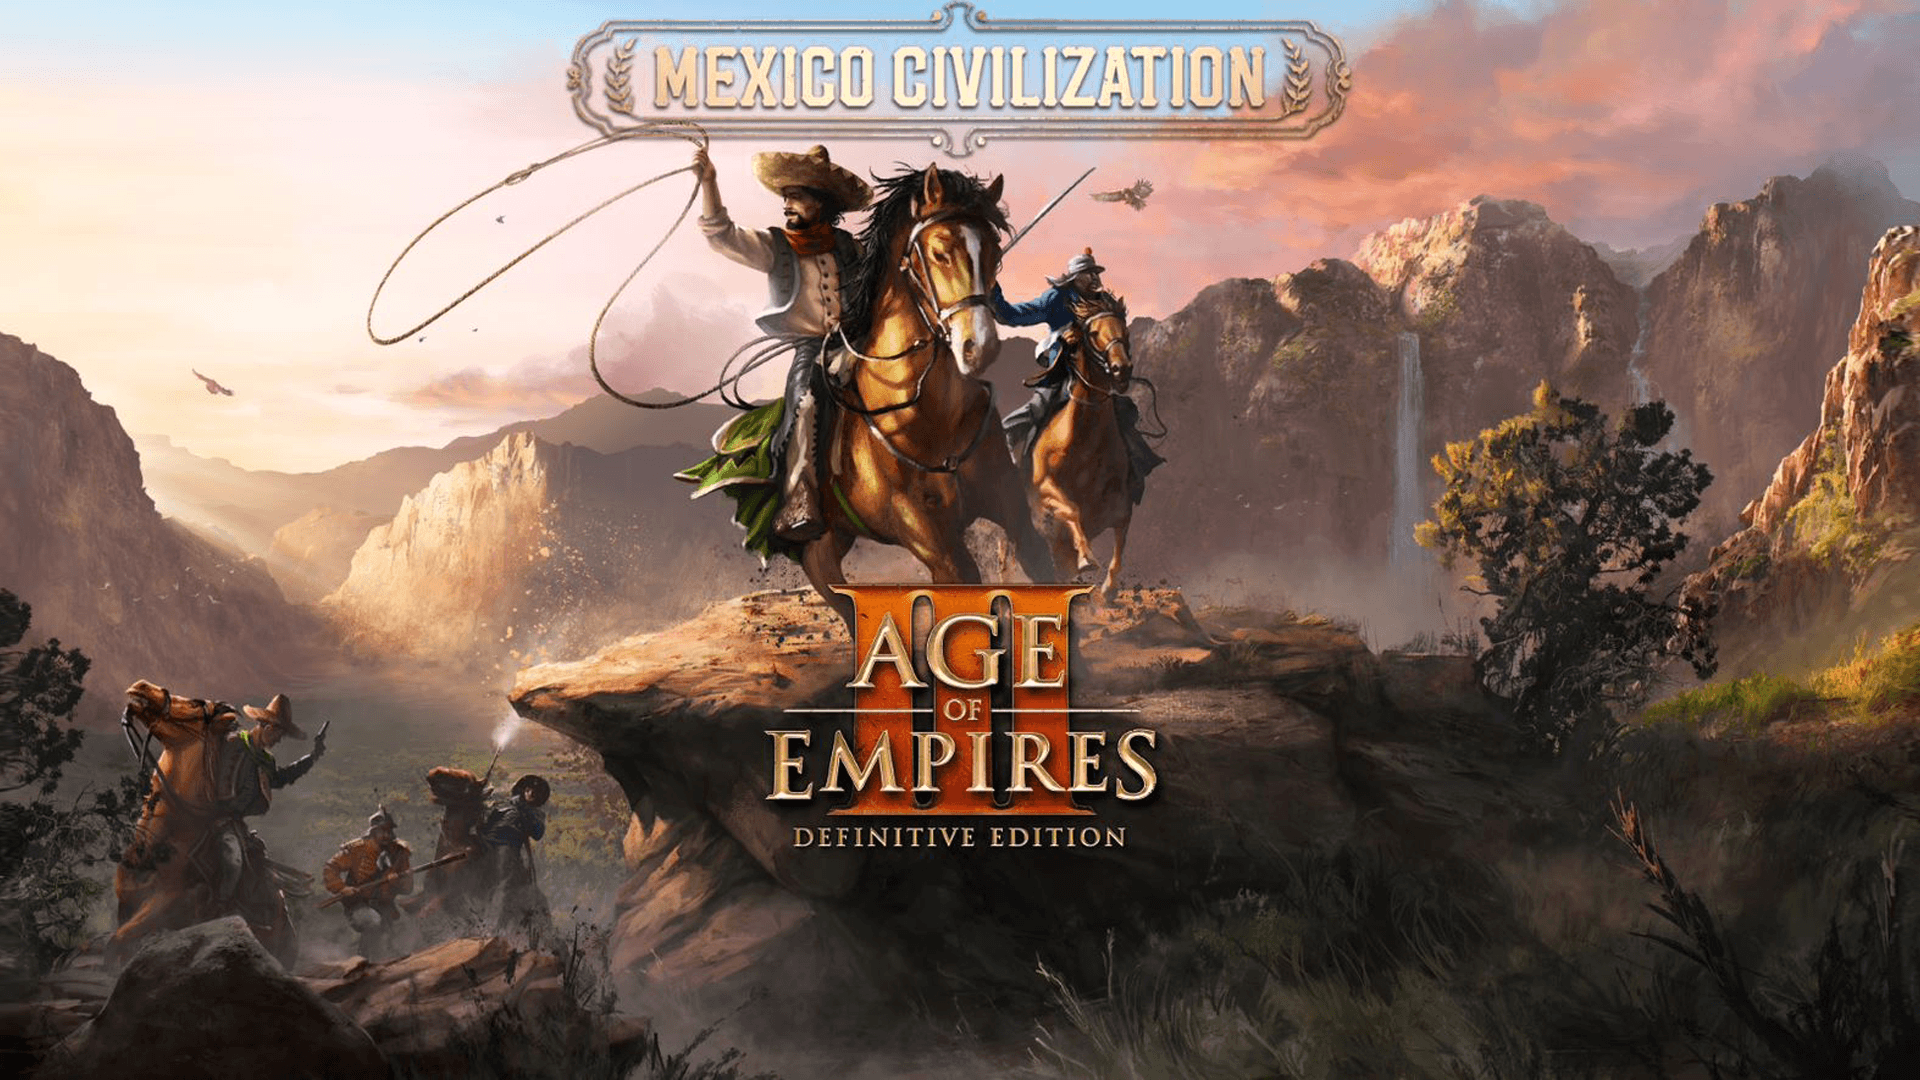 Video For The Mexico civilization joins Age of Empires III: Definitive Edition!